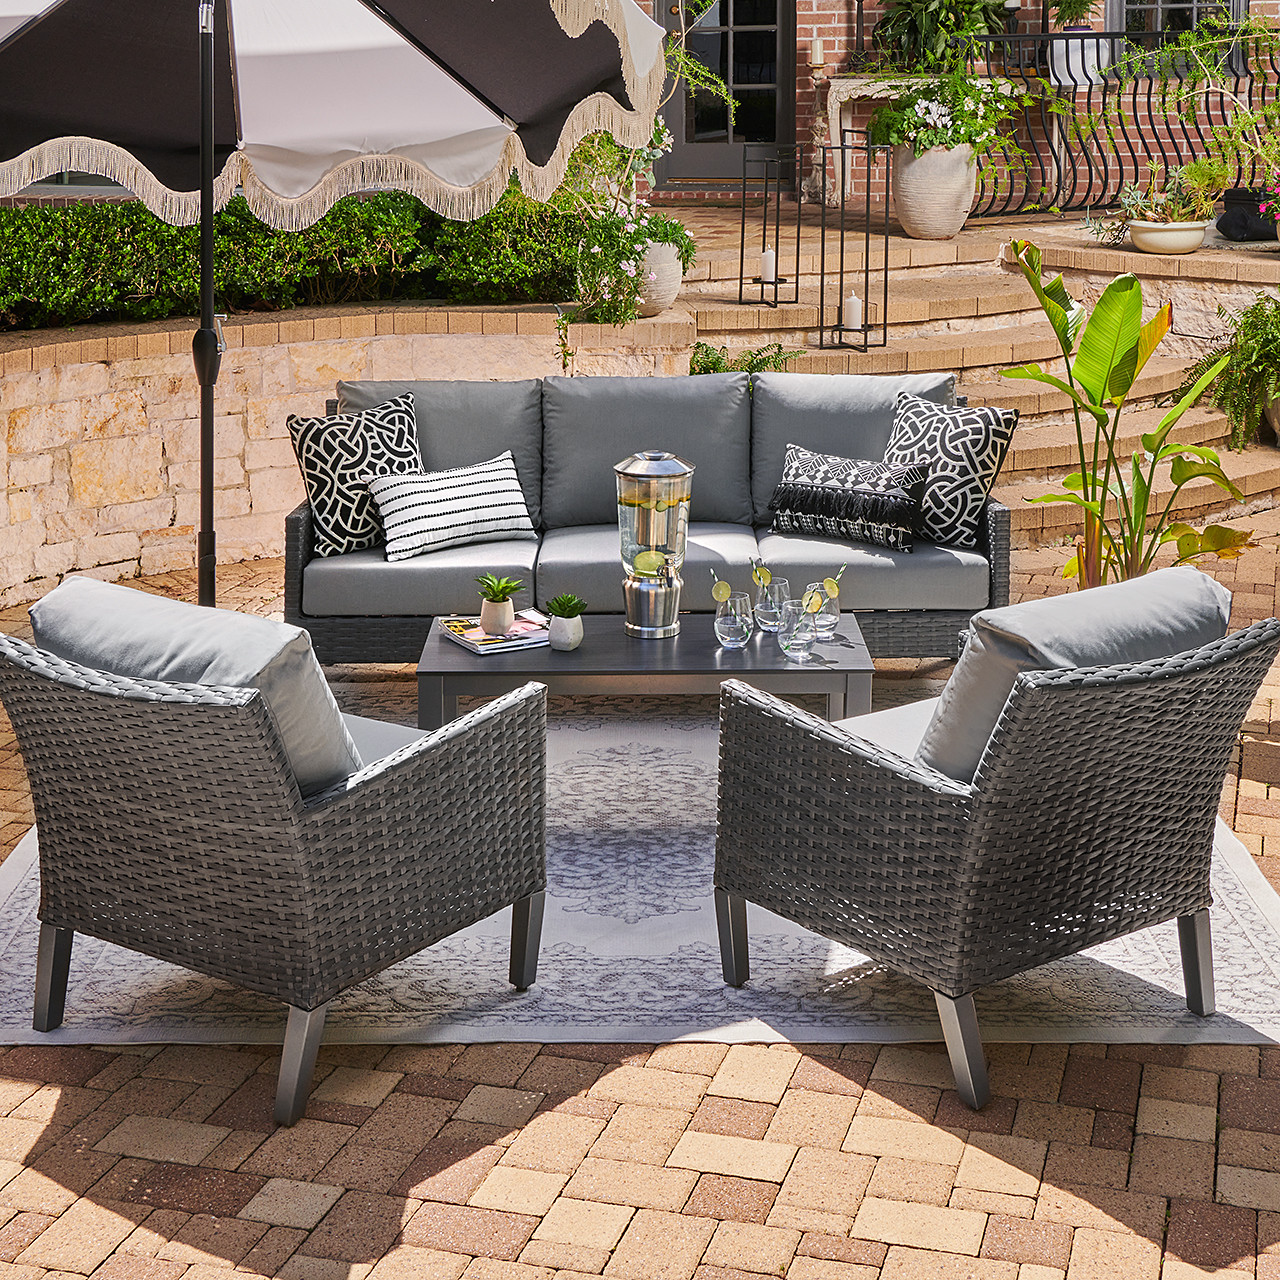 Amari Pepper Outdoor Wicker 4 Pc. Sofa Group with 43 x 25 in. Coffee Table